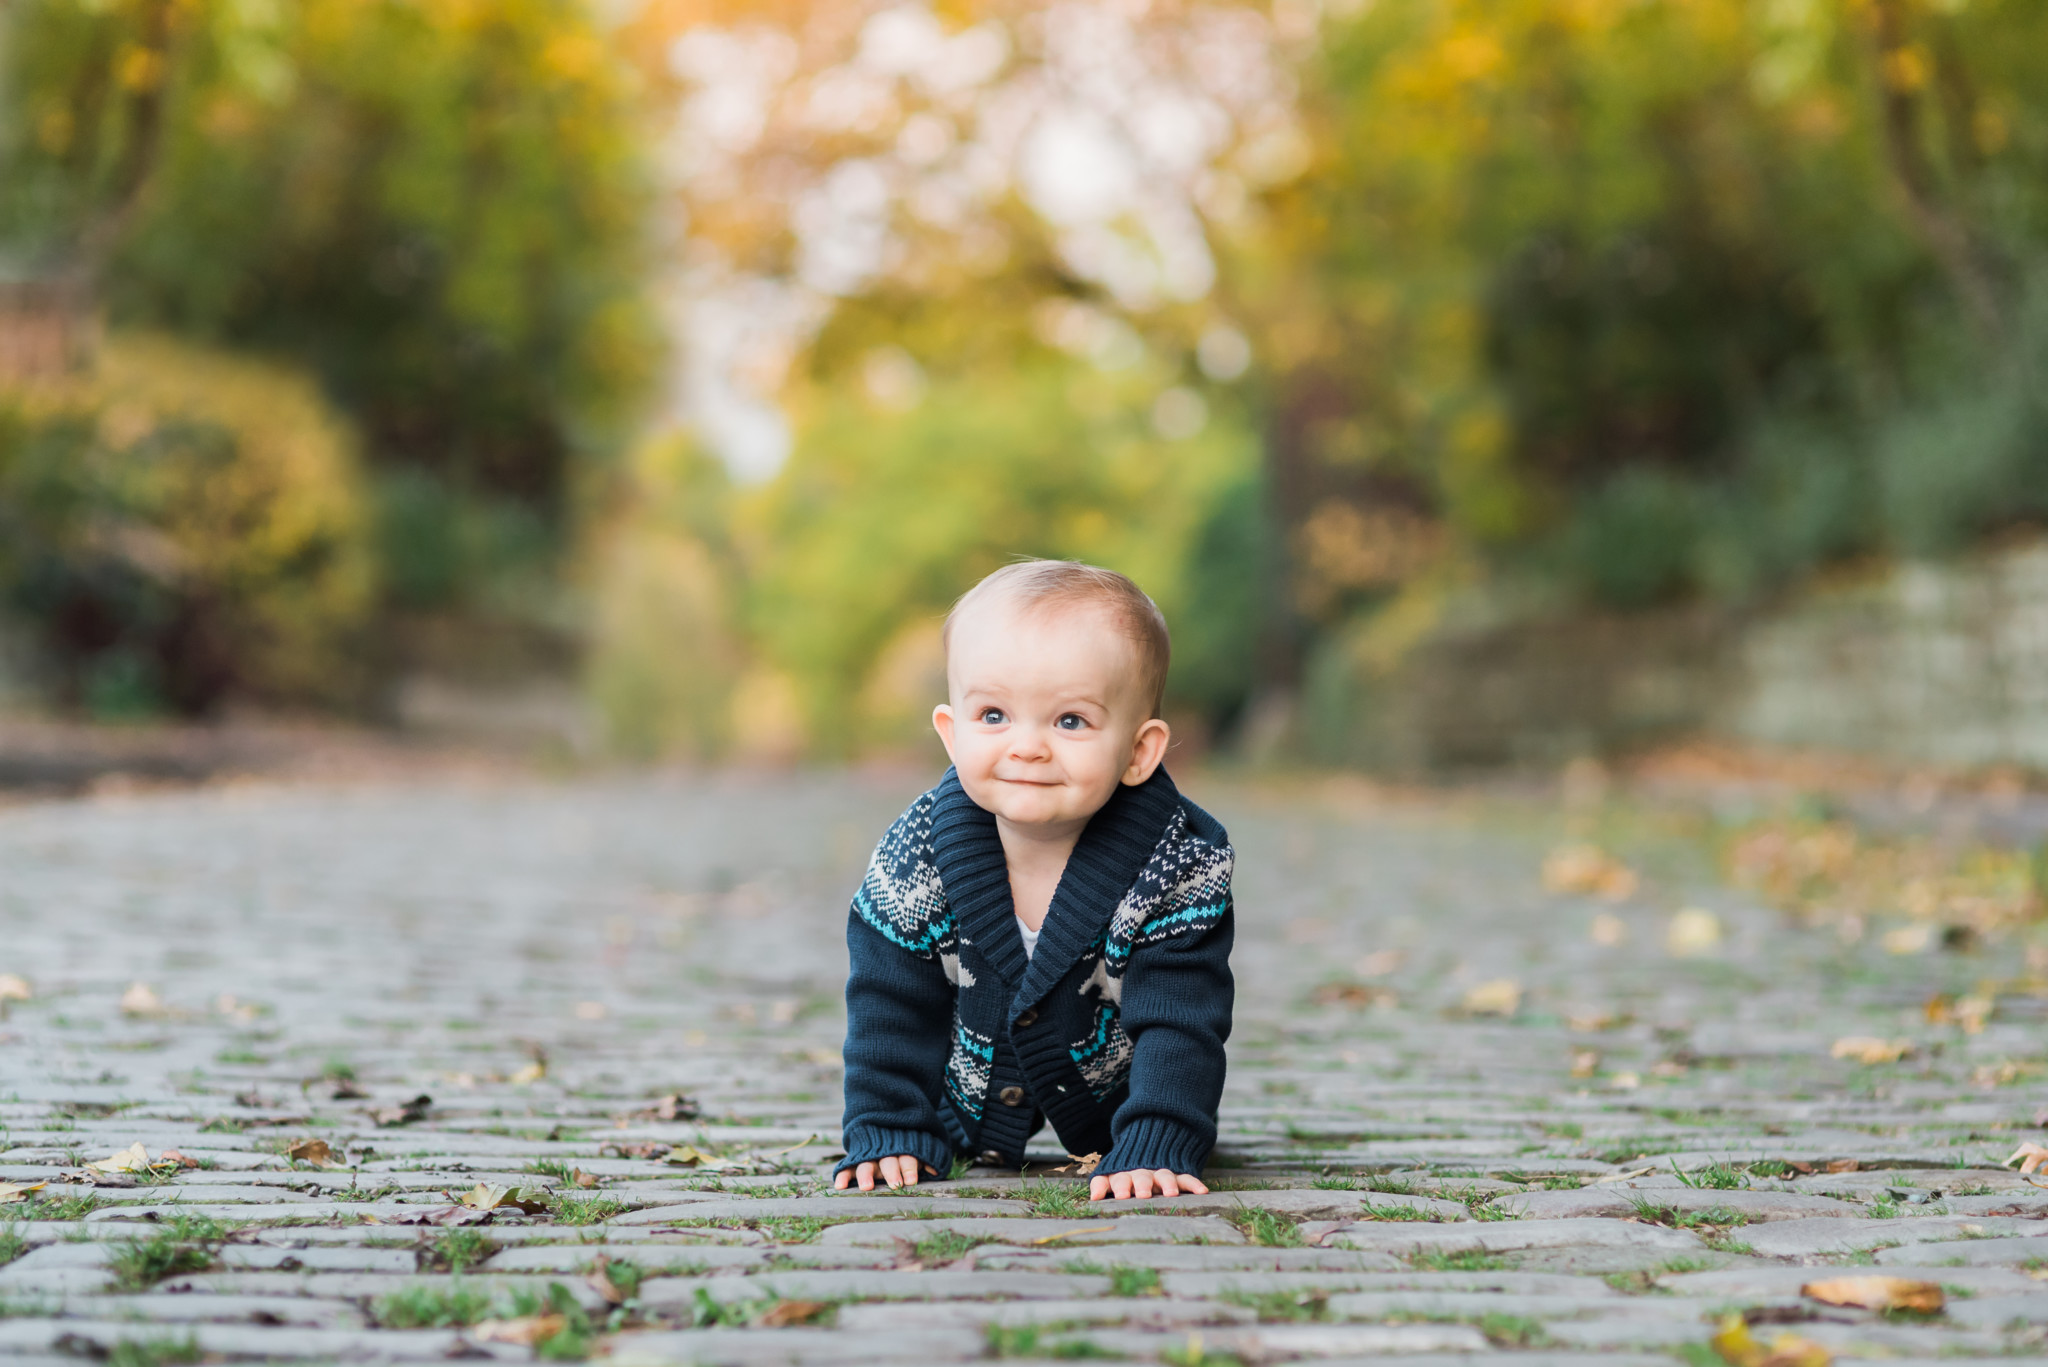 One year old boy smiles as he crawls on a cobblestone street. He wears a navy sweater and green and yellow trees shine in the background for this Pittsburgh family photographer session